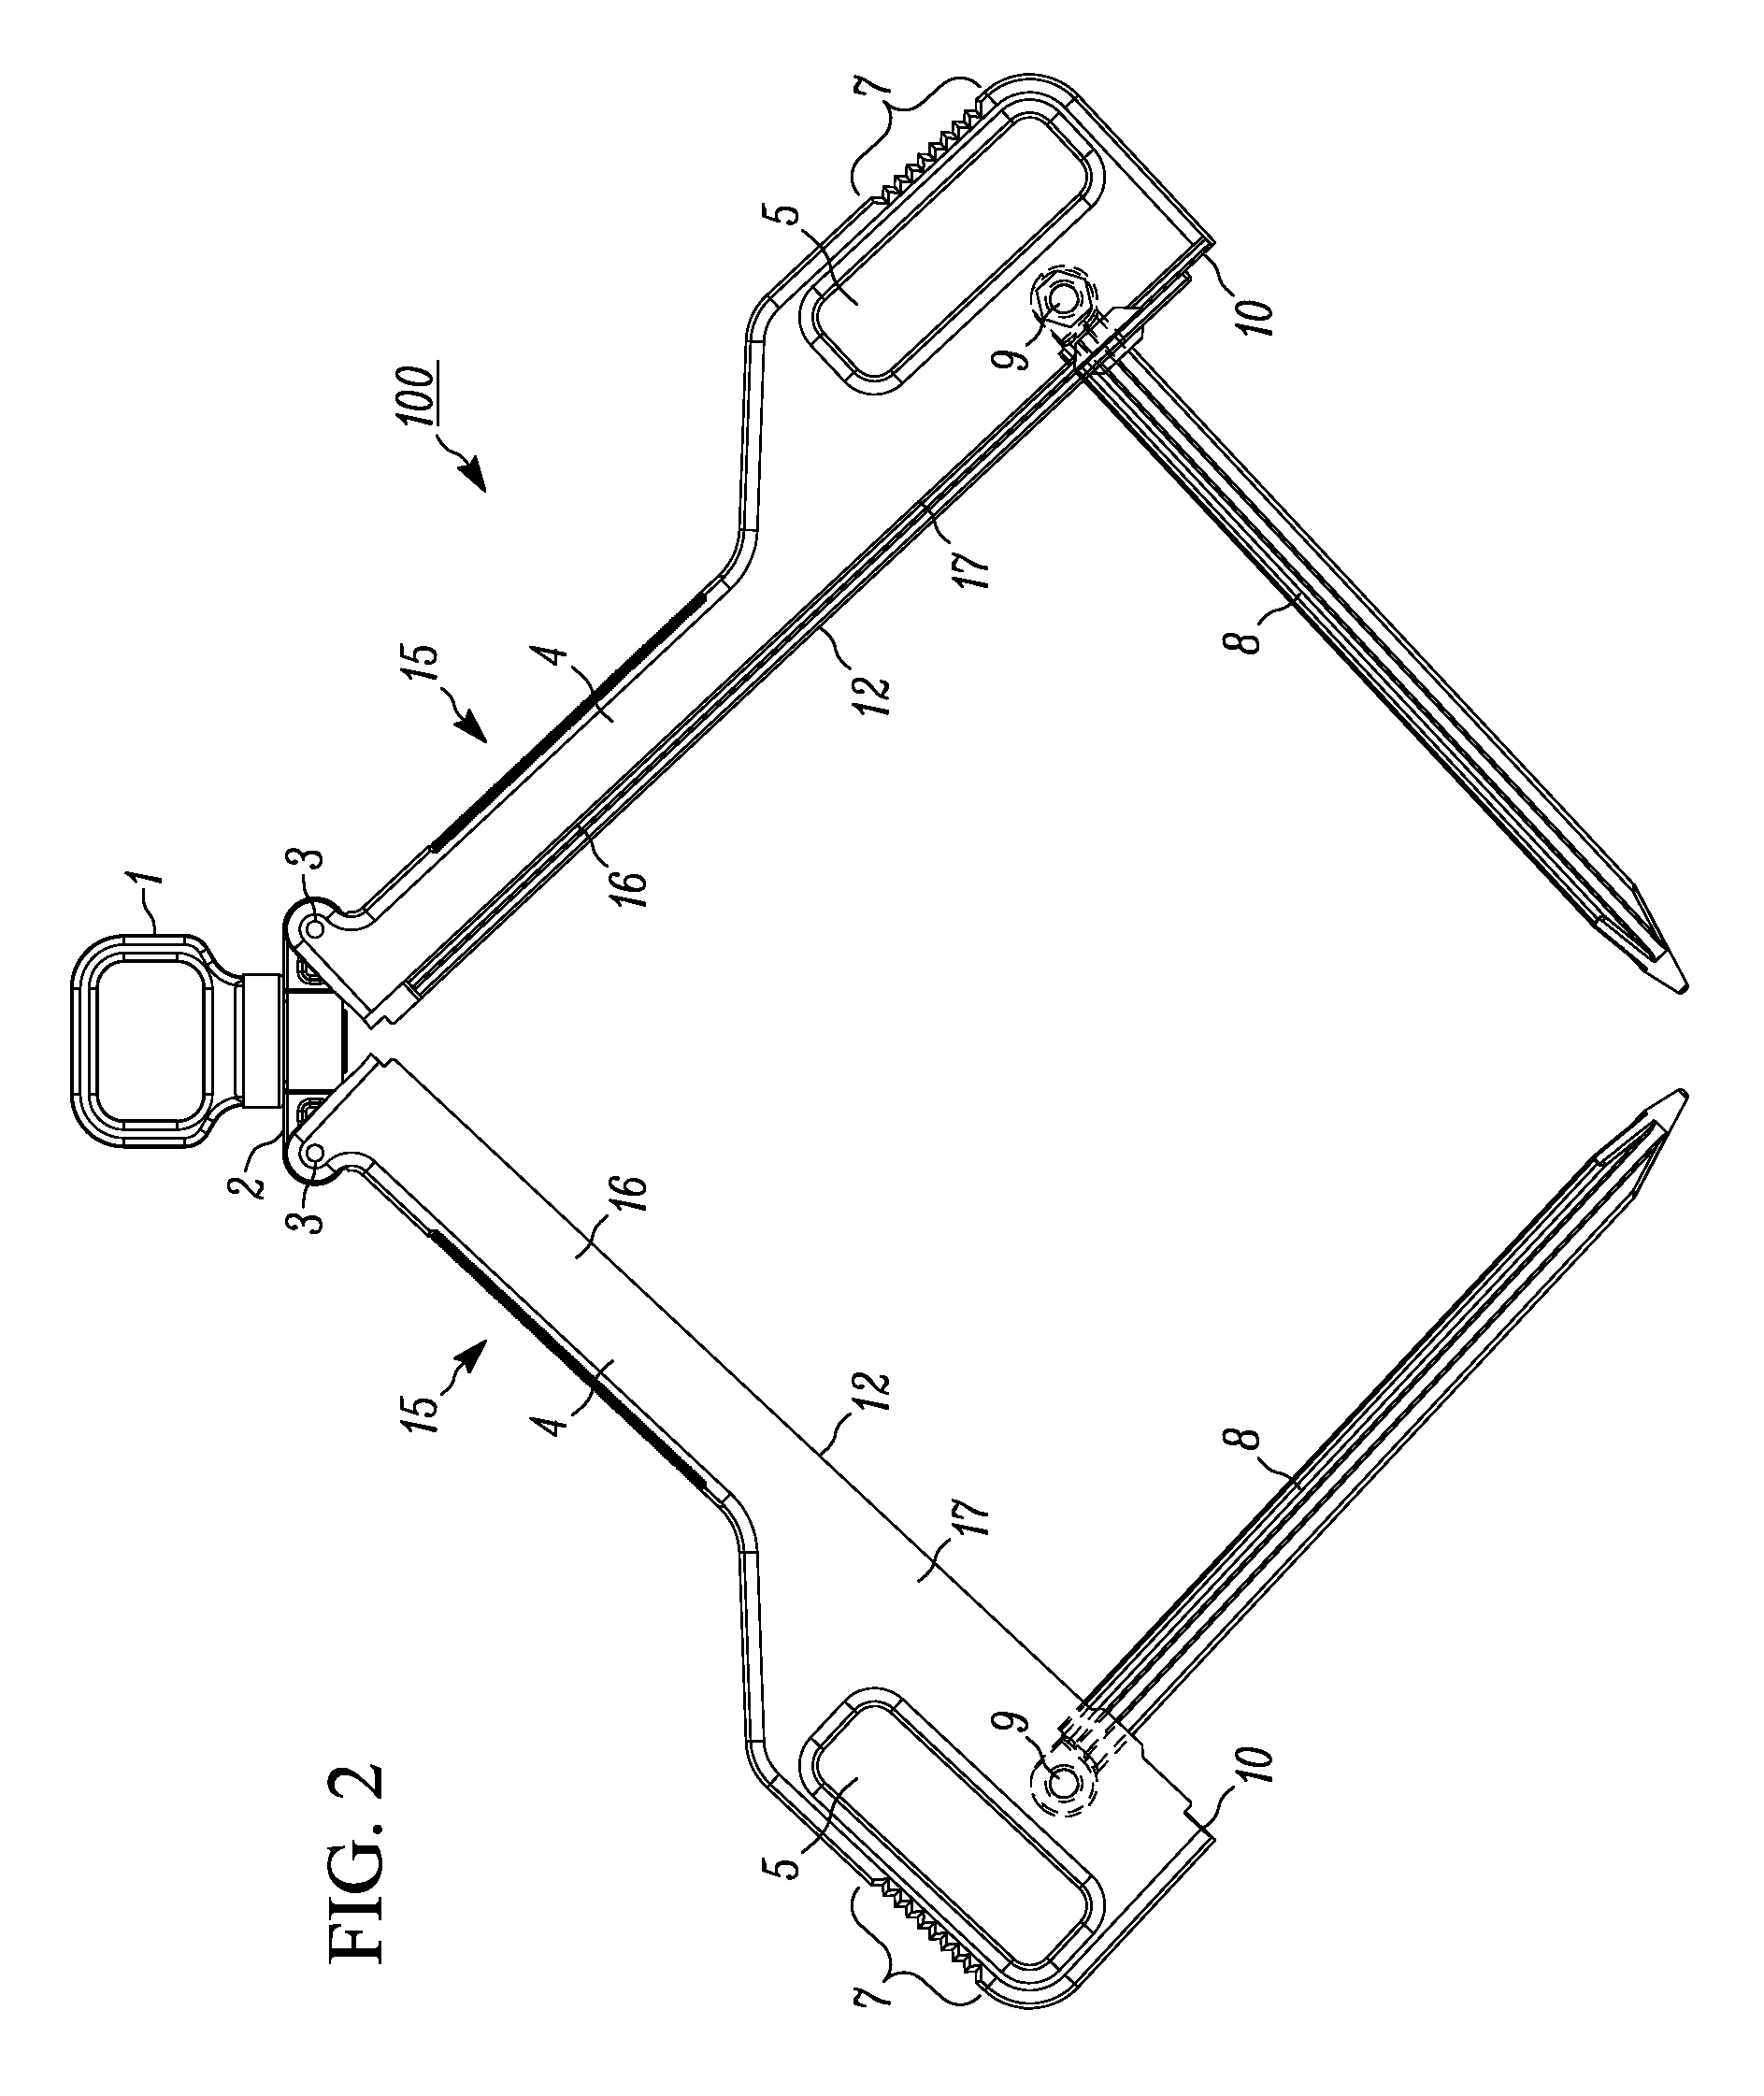 Tether restraint apparatus and method